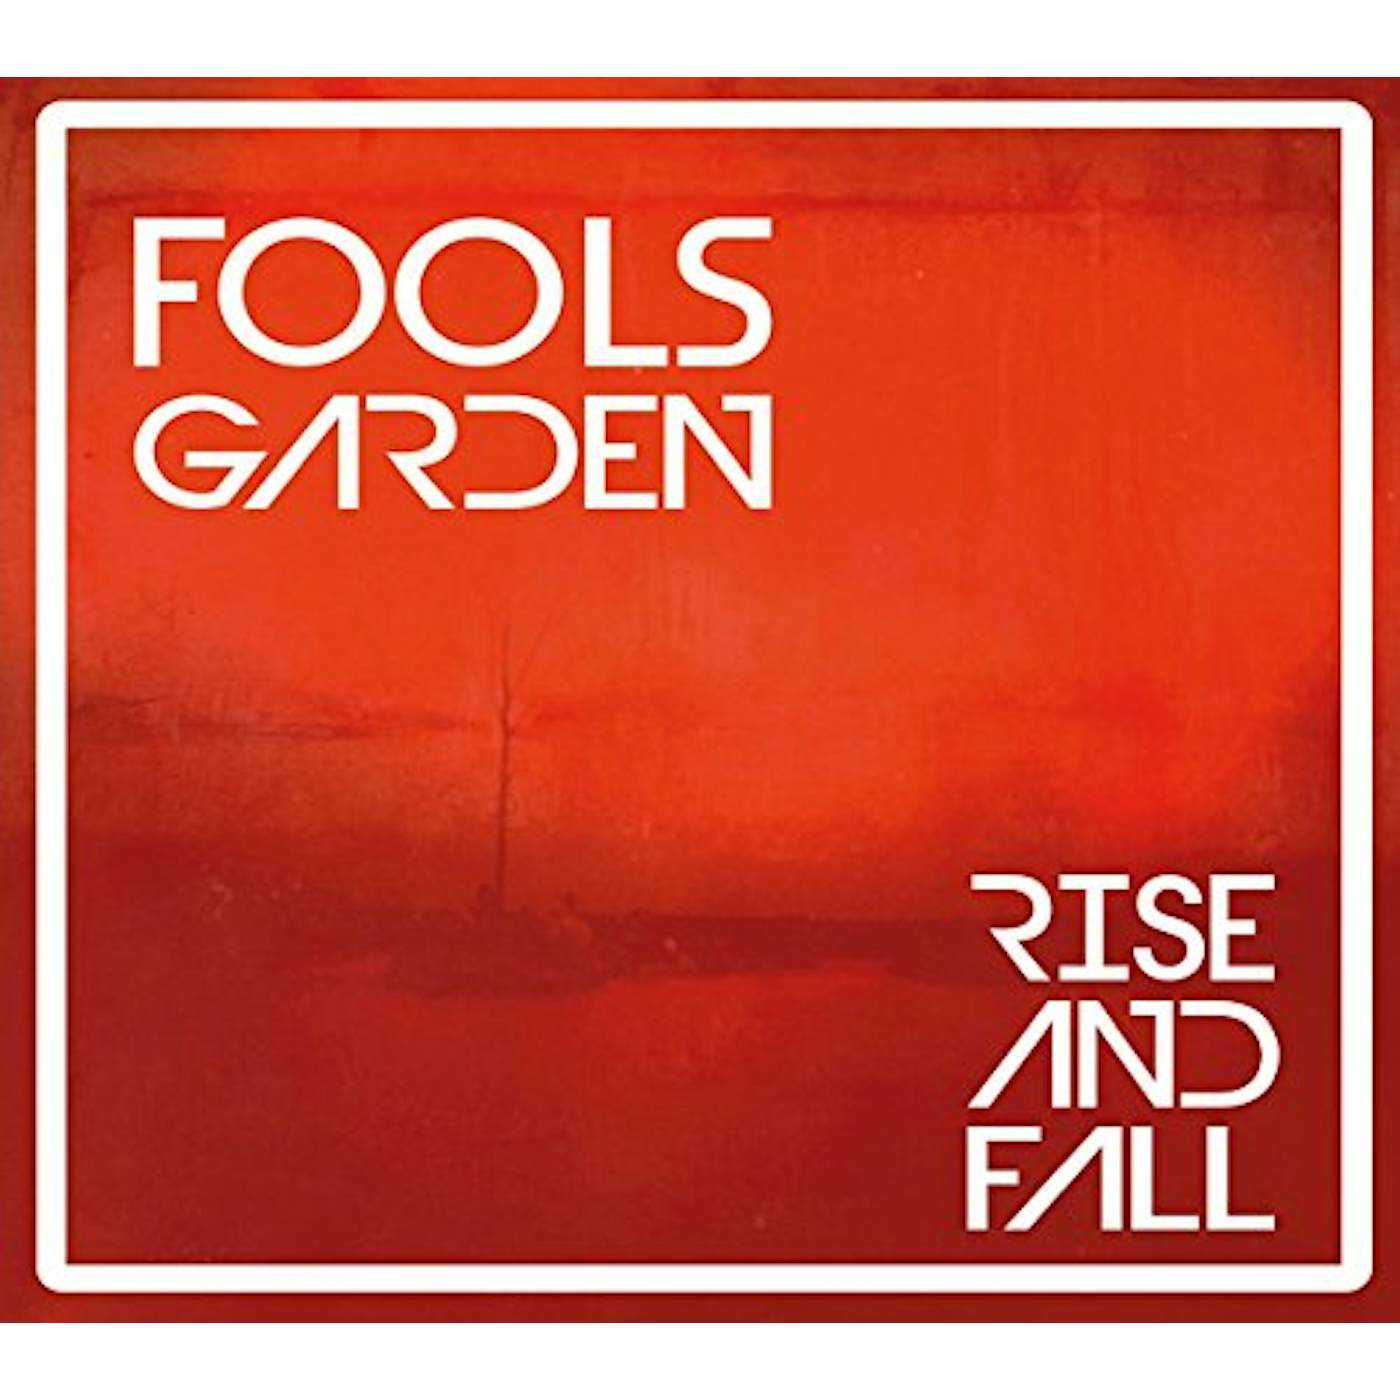 Fools Garden Rise and Fall Vinyl Record